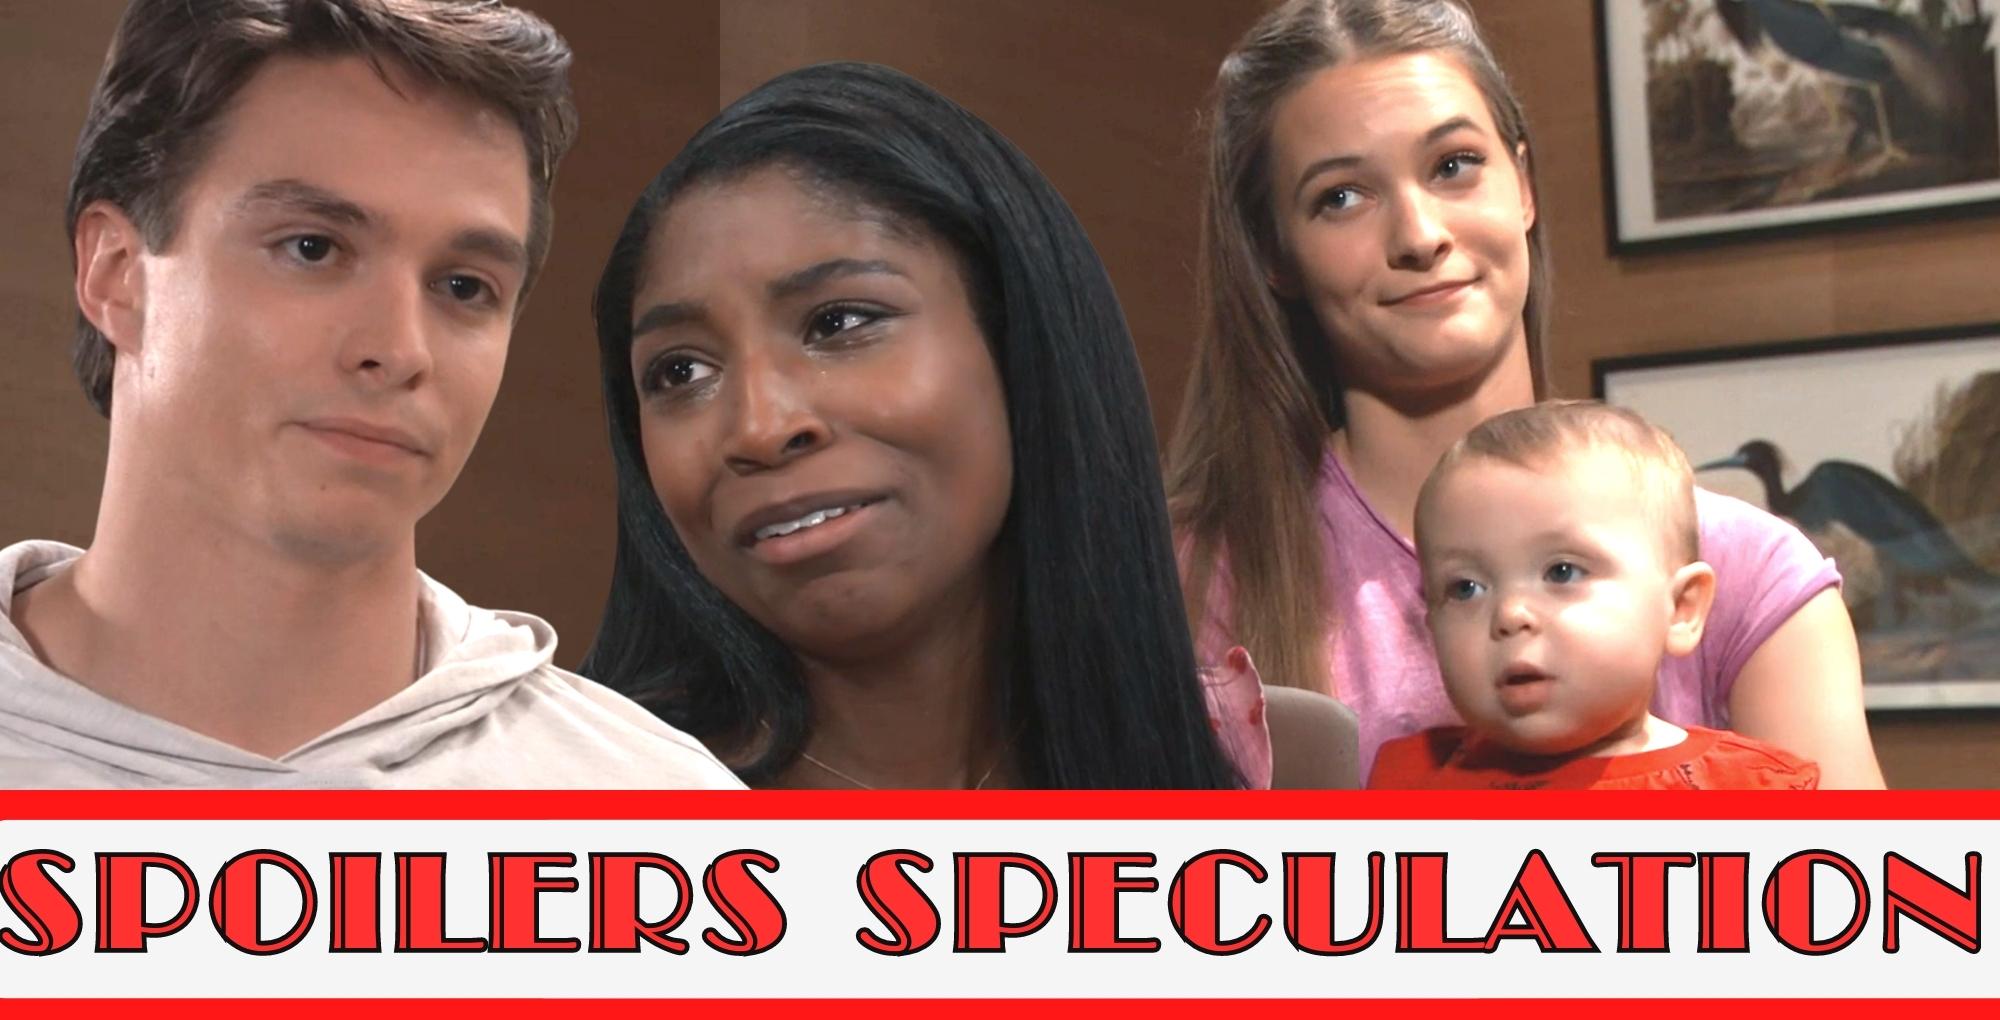 gh spoilers speculation with spencer, trina, esme, and ace.